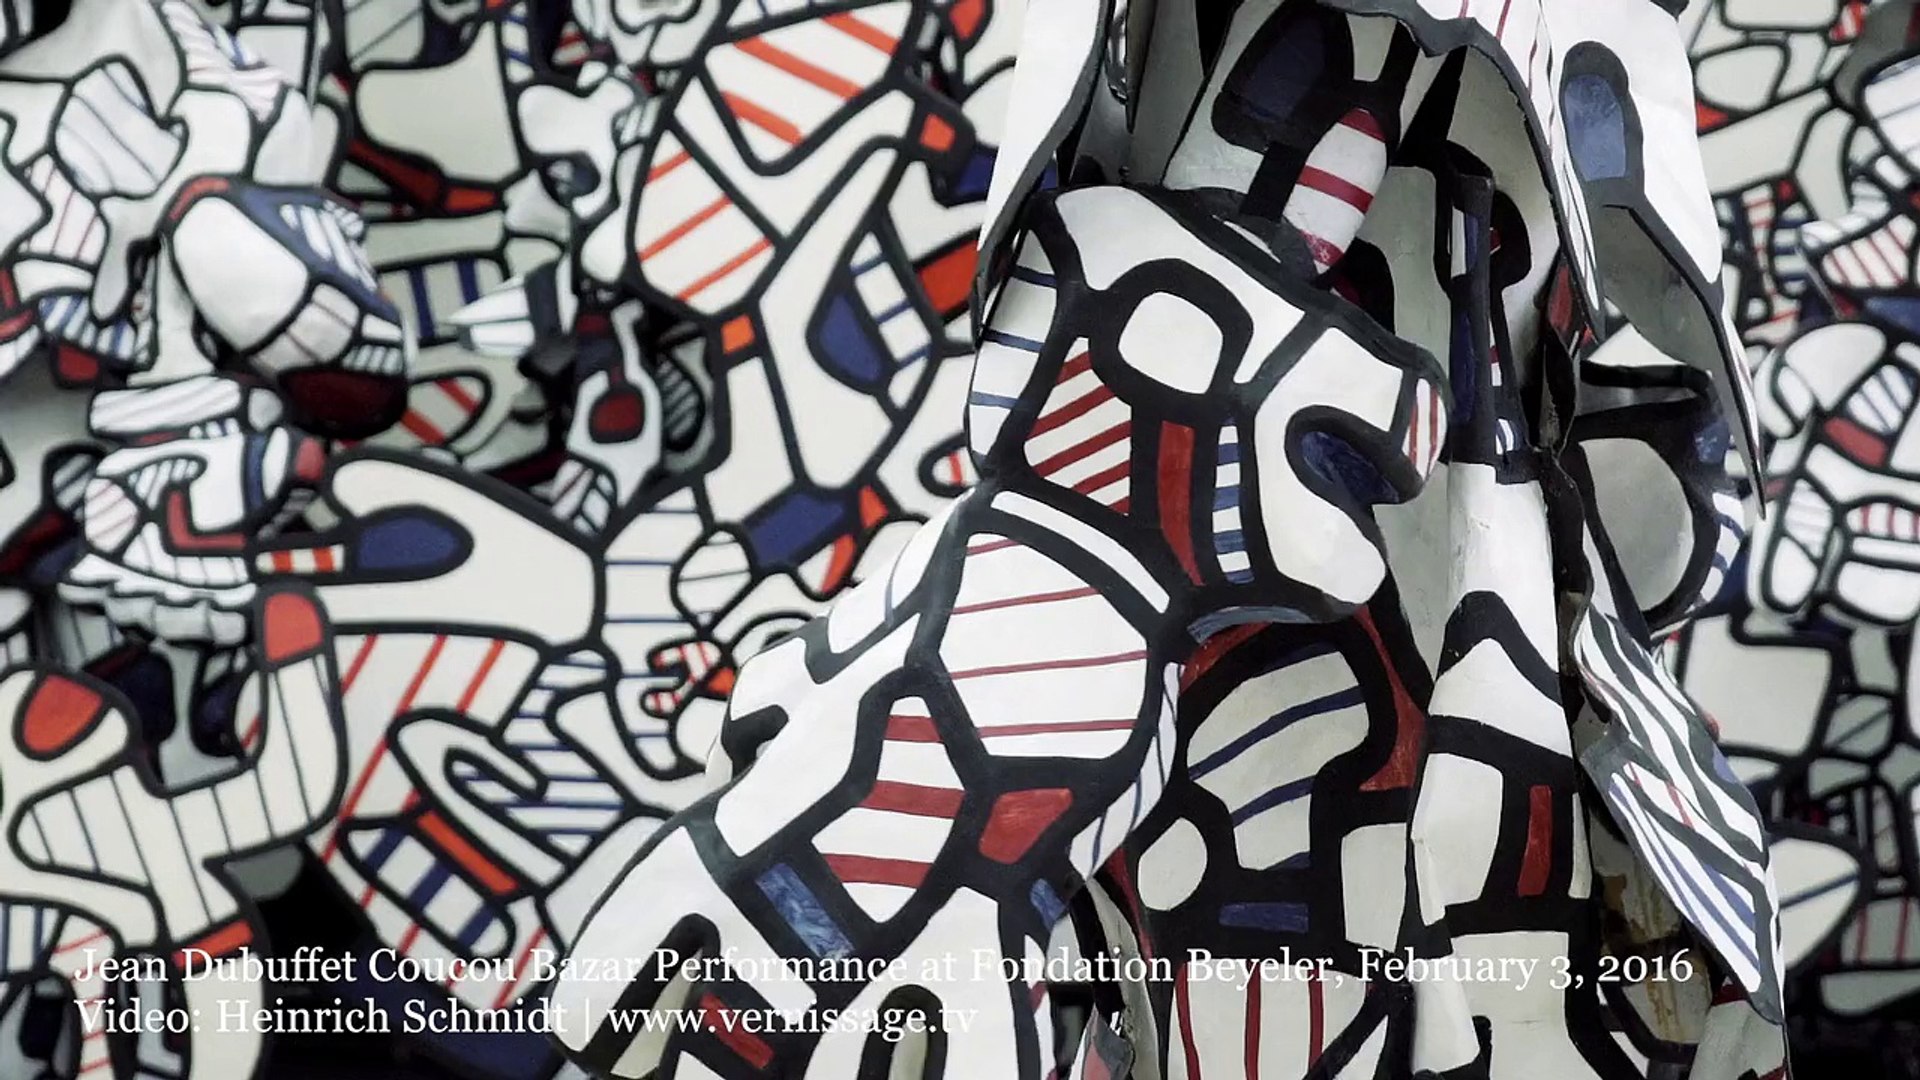 Jean Dubuffet Coucou Bazar Dance Performance at Fondation Beyeler - video  Dailymotion